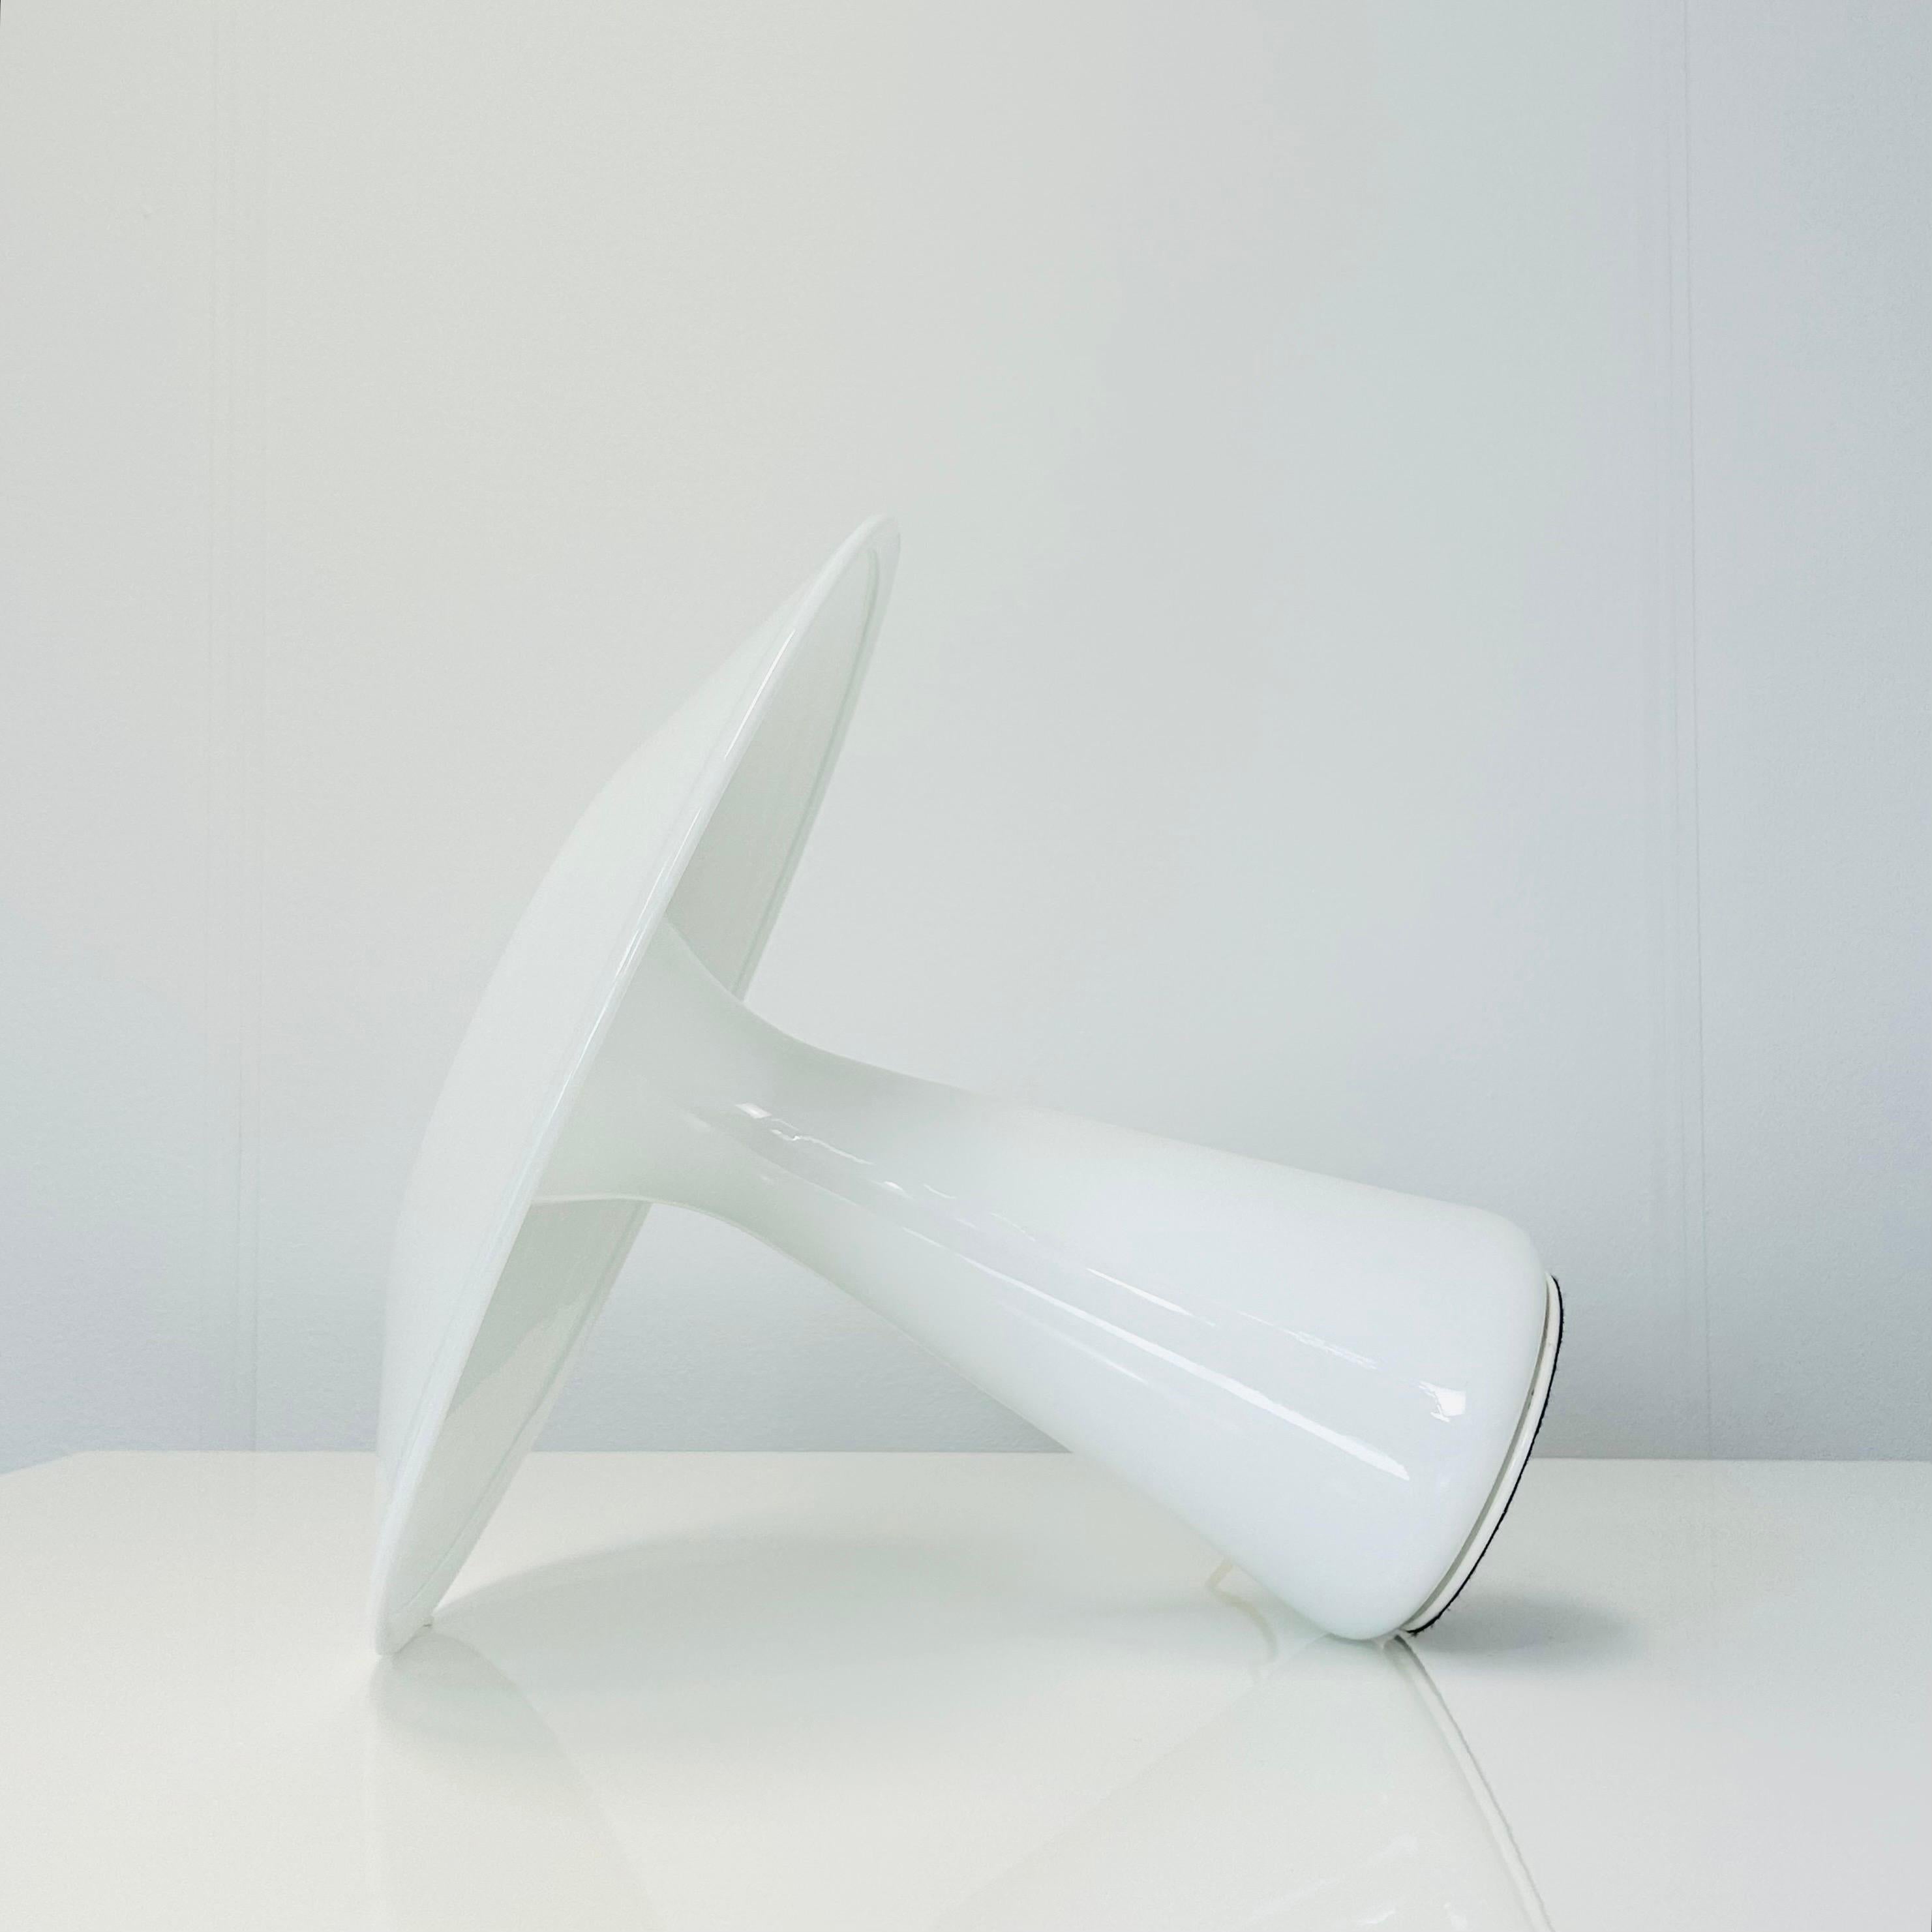 Late 20th Century A white Mushroom Glass Desk Lamp by Sidse Werner for Holmegaard, 1980s, Denmark For Sale